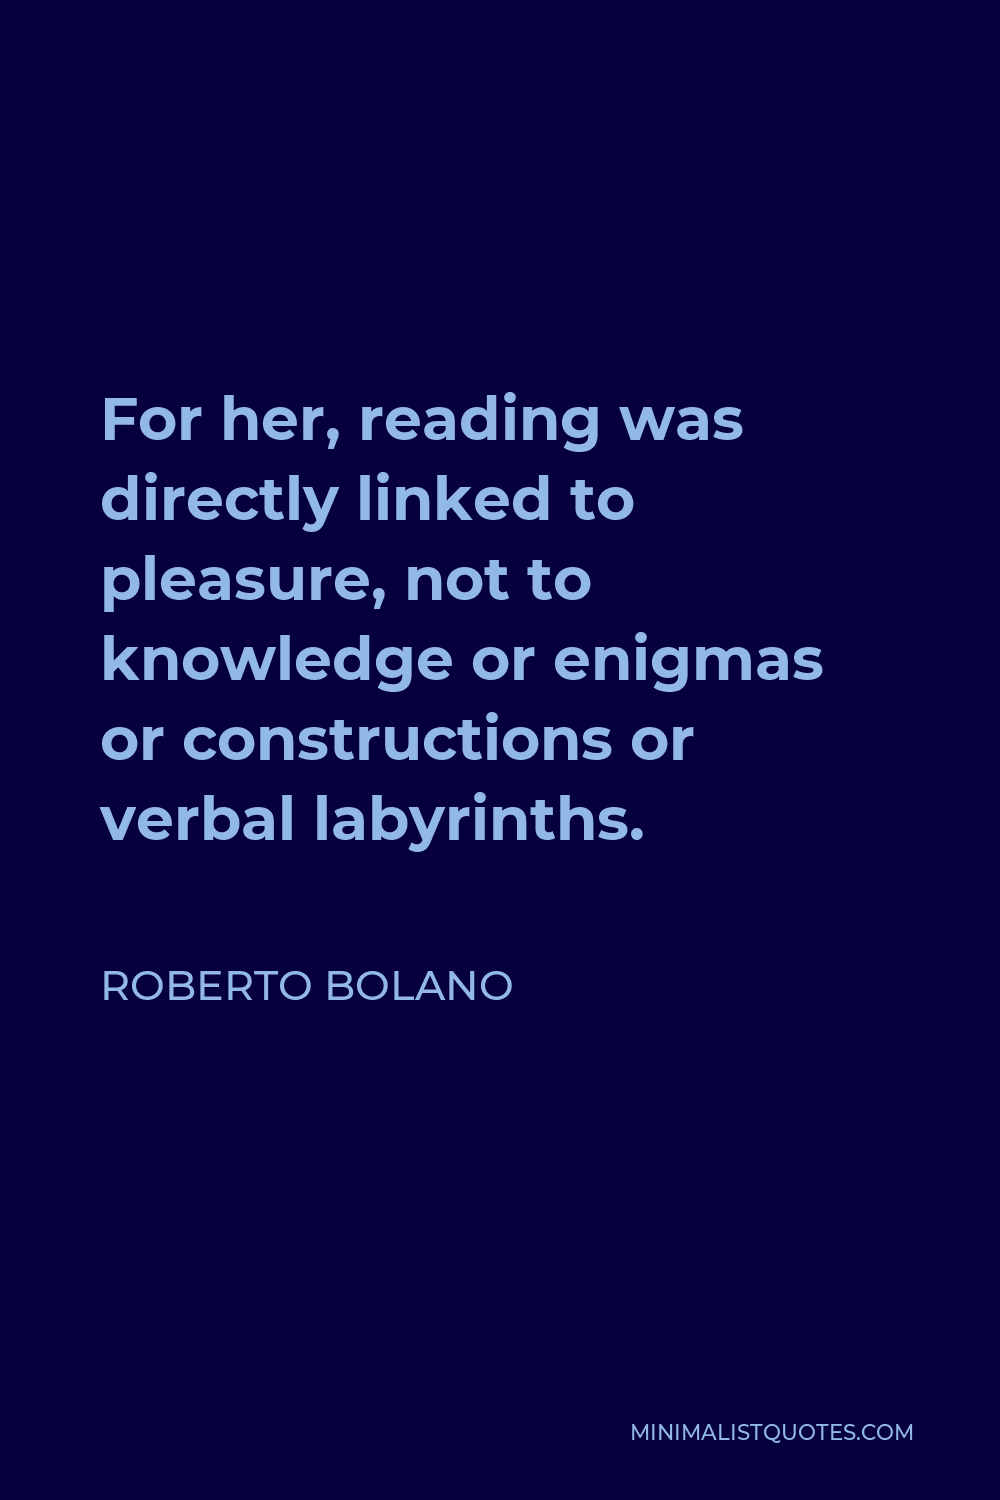 Roberto Bolano Quote - For her, reading was directly linked to pleasure, not to knowledge or enigmas or constructions or verbal labyrinths.